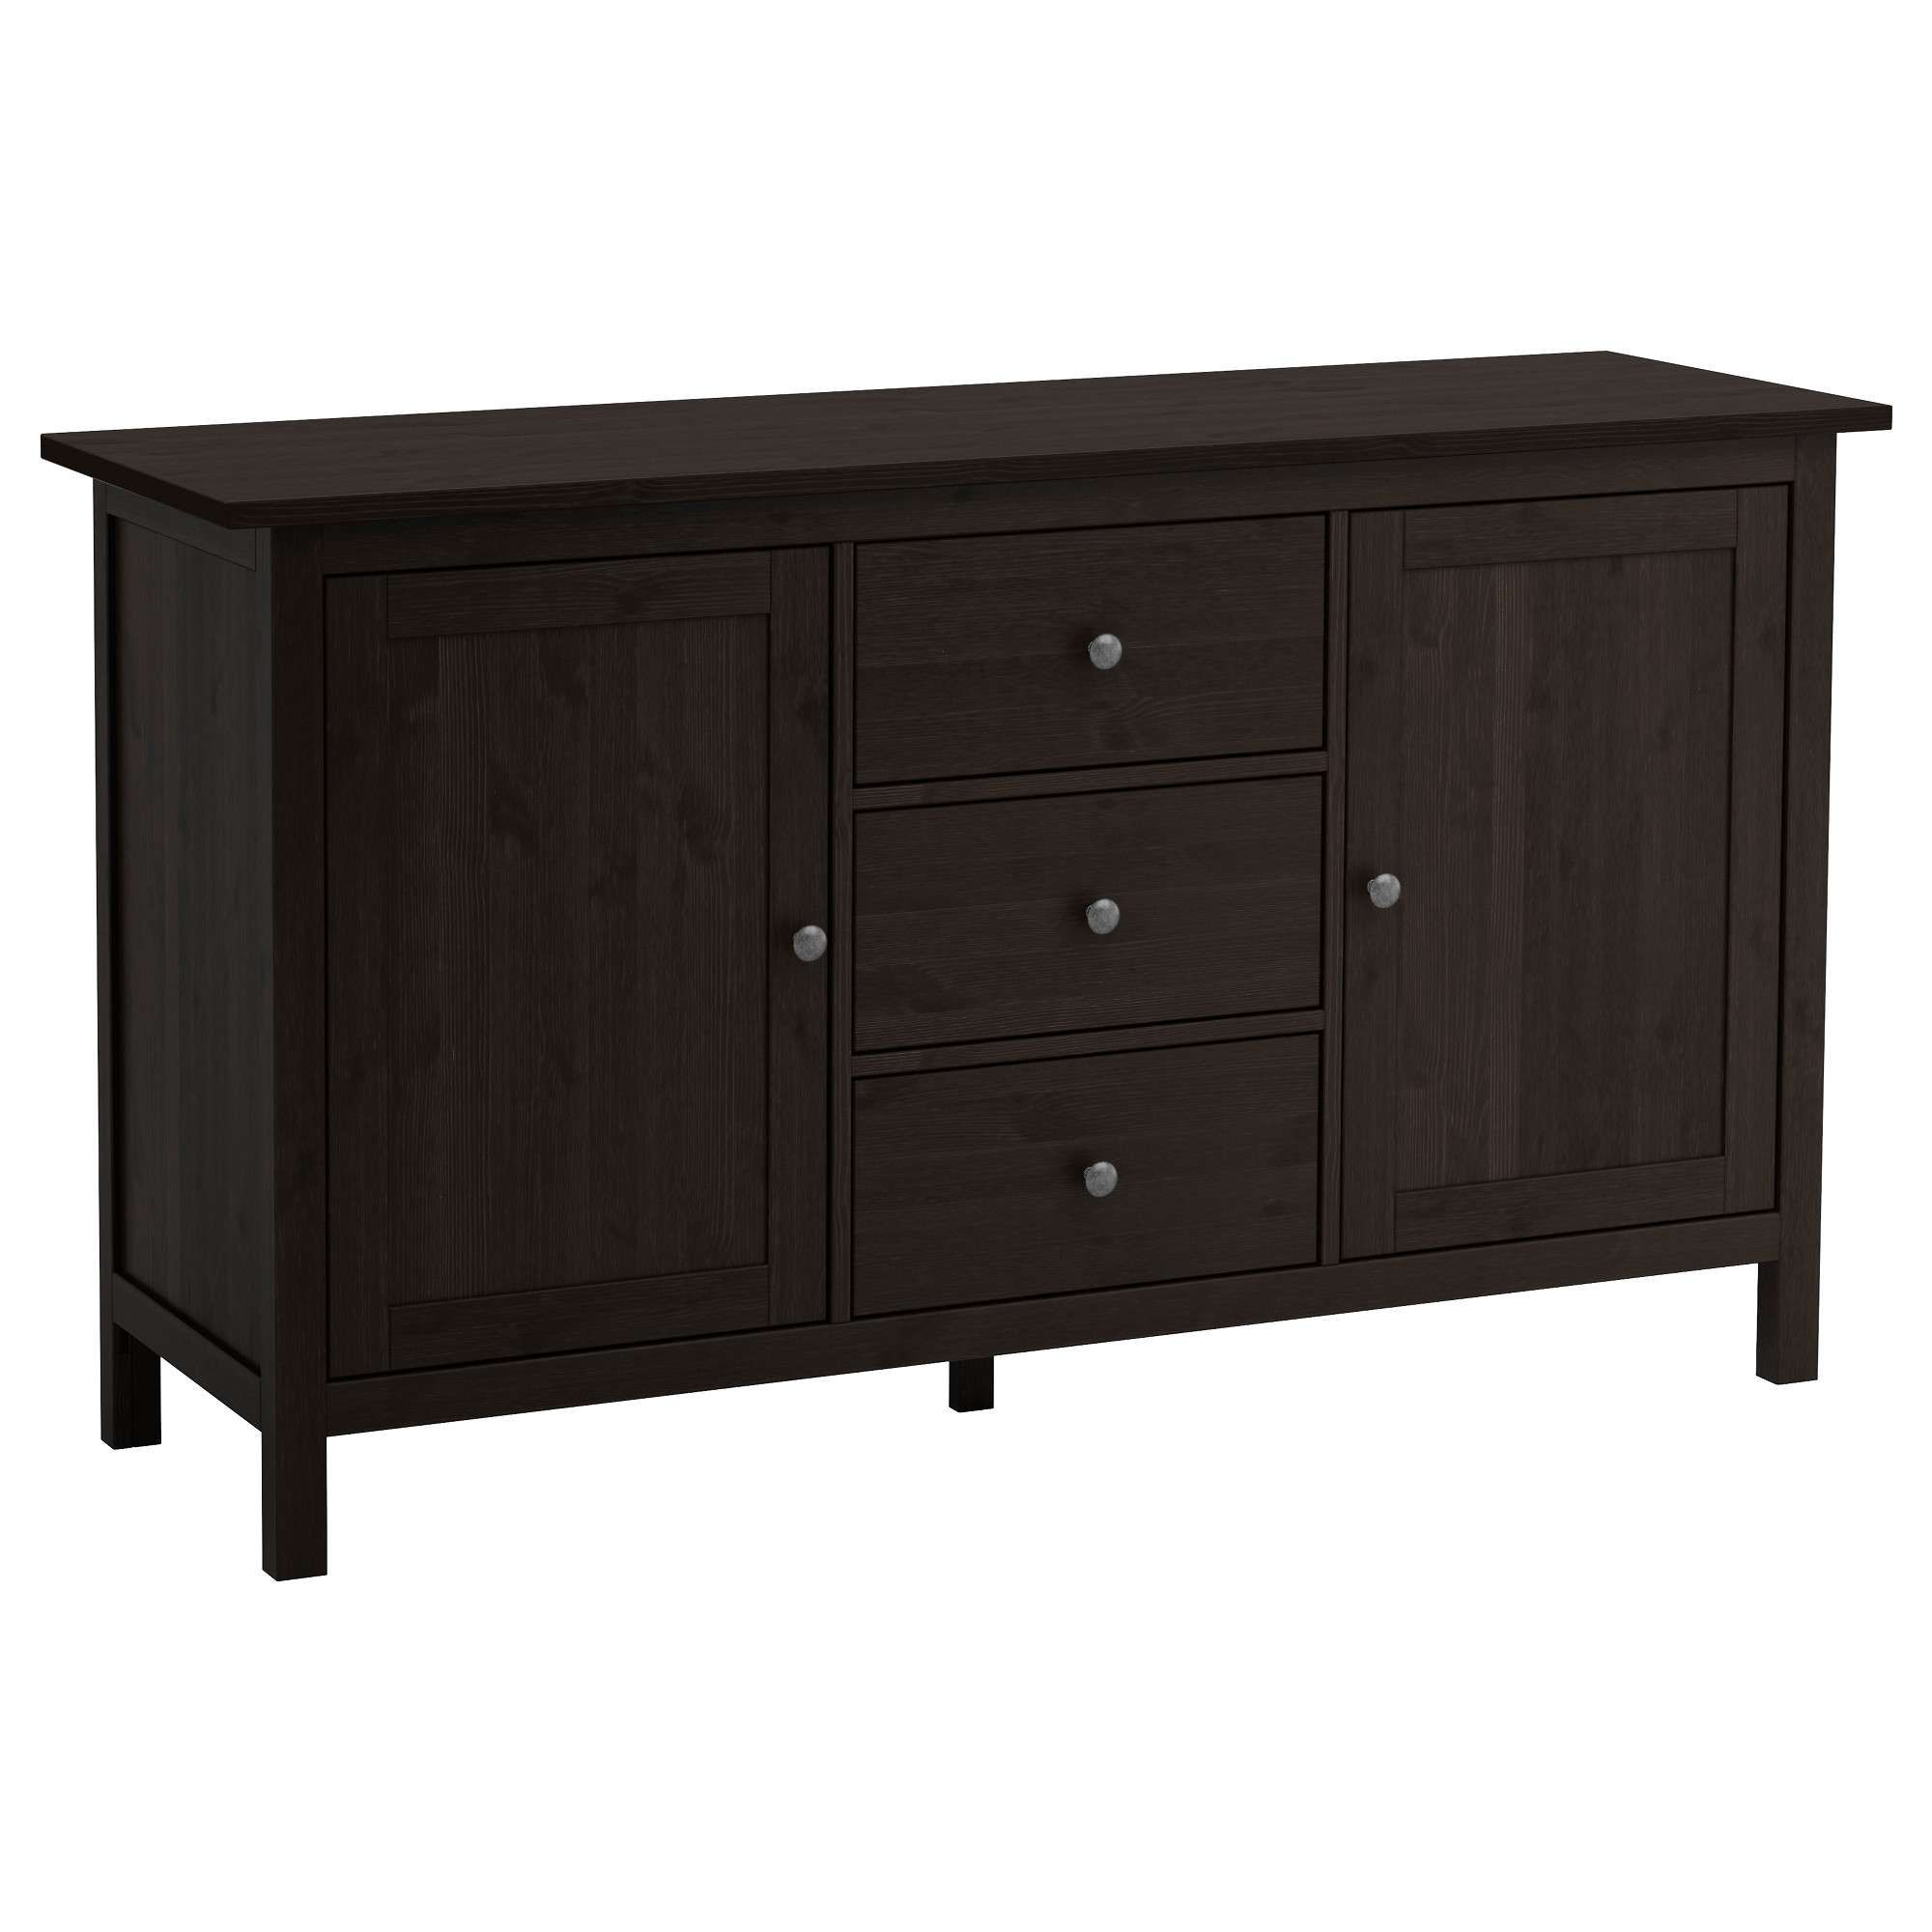 Hemnes Sideboard – Black Brown – Ikea For Black Sideboards And Buffets (View 14 of 20)